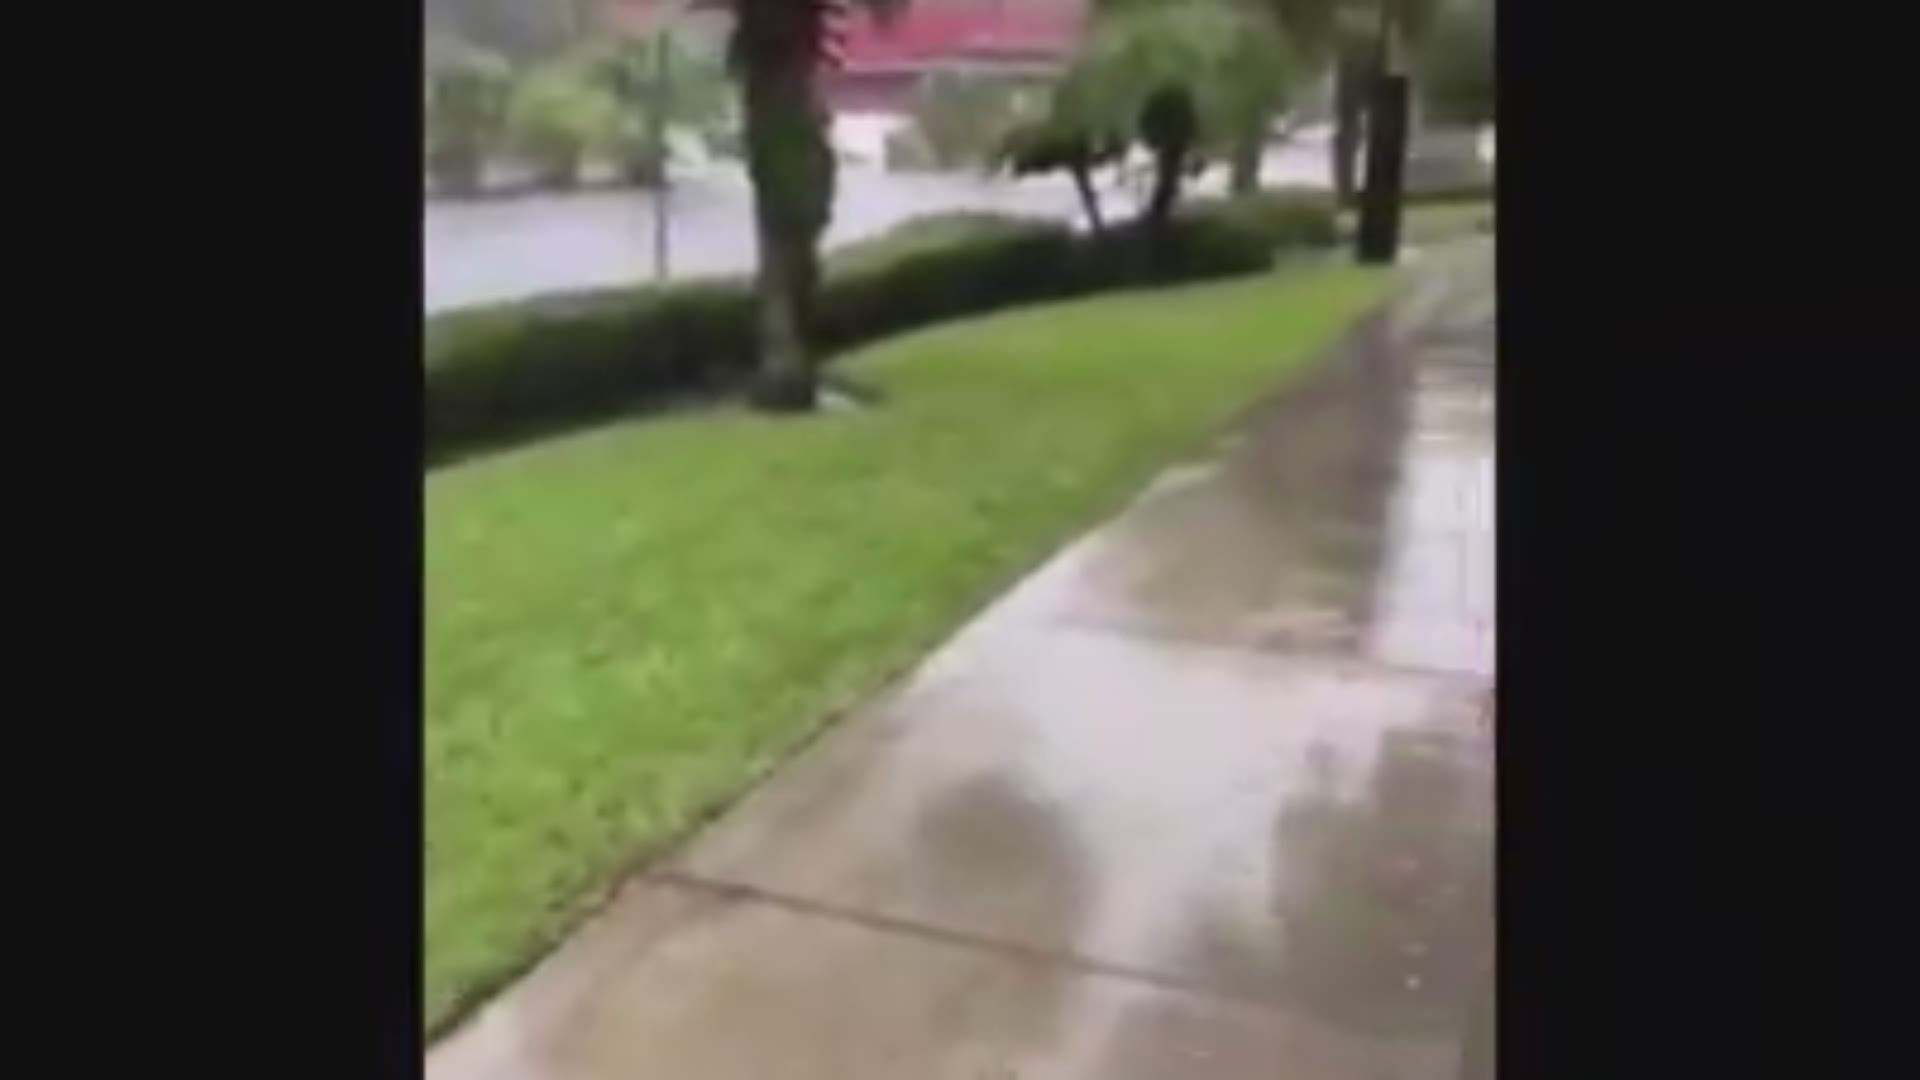 Downtown St. Augustine experienced some serious flooding Sunday evening at Bridge Street and Cordova Street. Video shout by resident Stacey Ann.